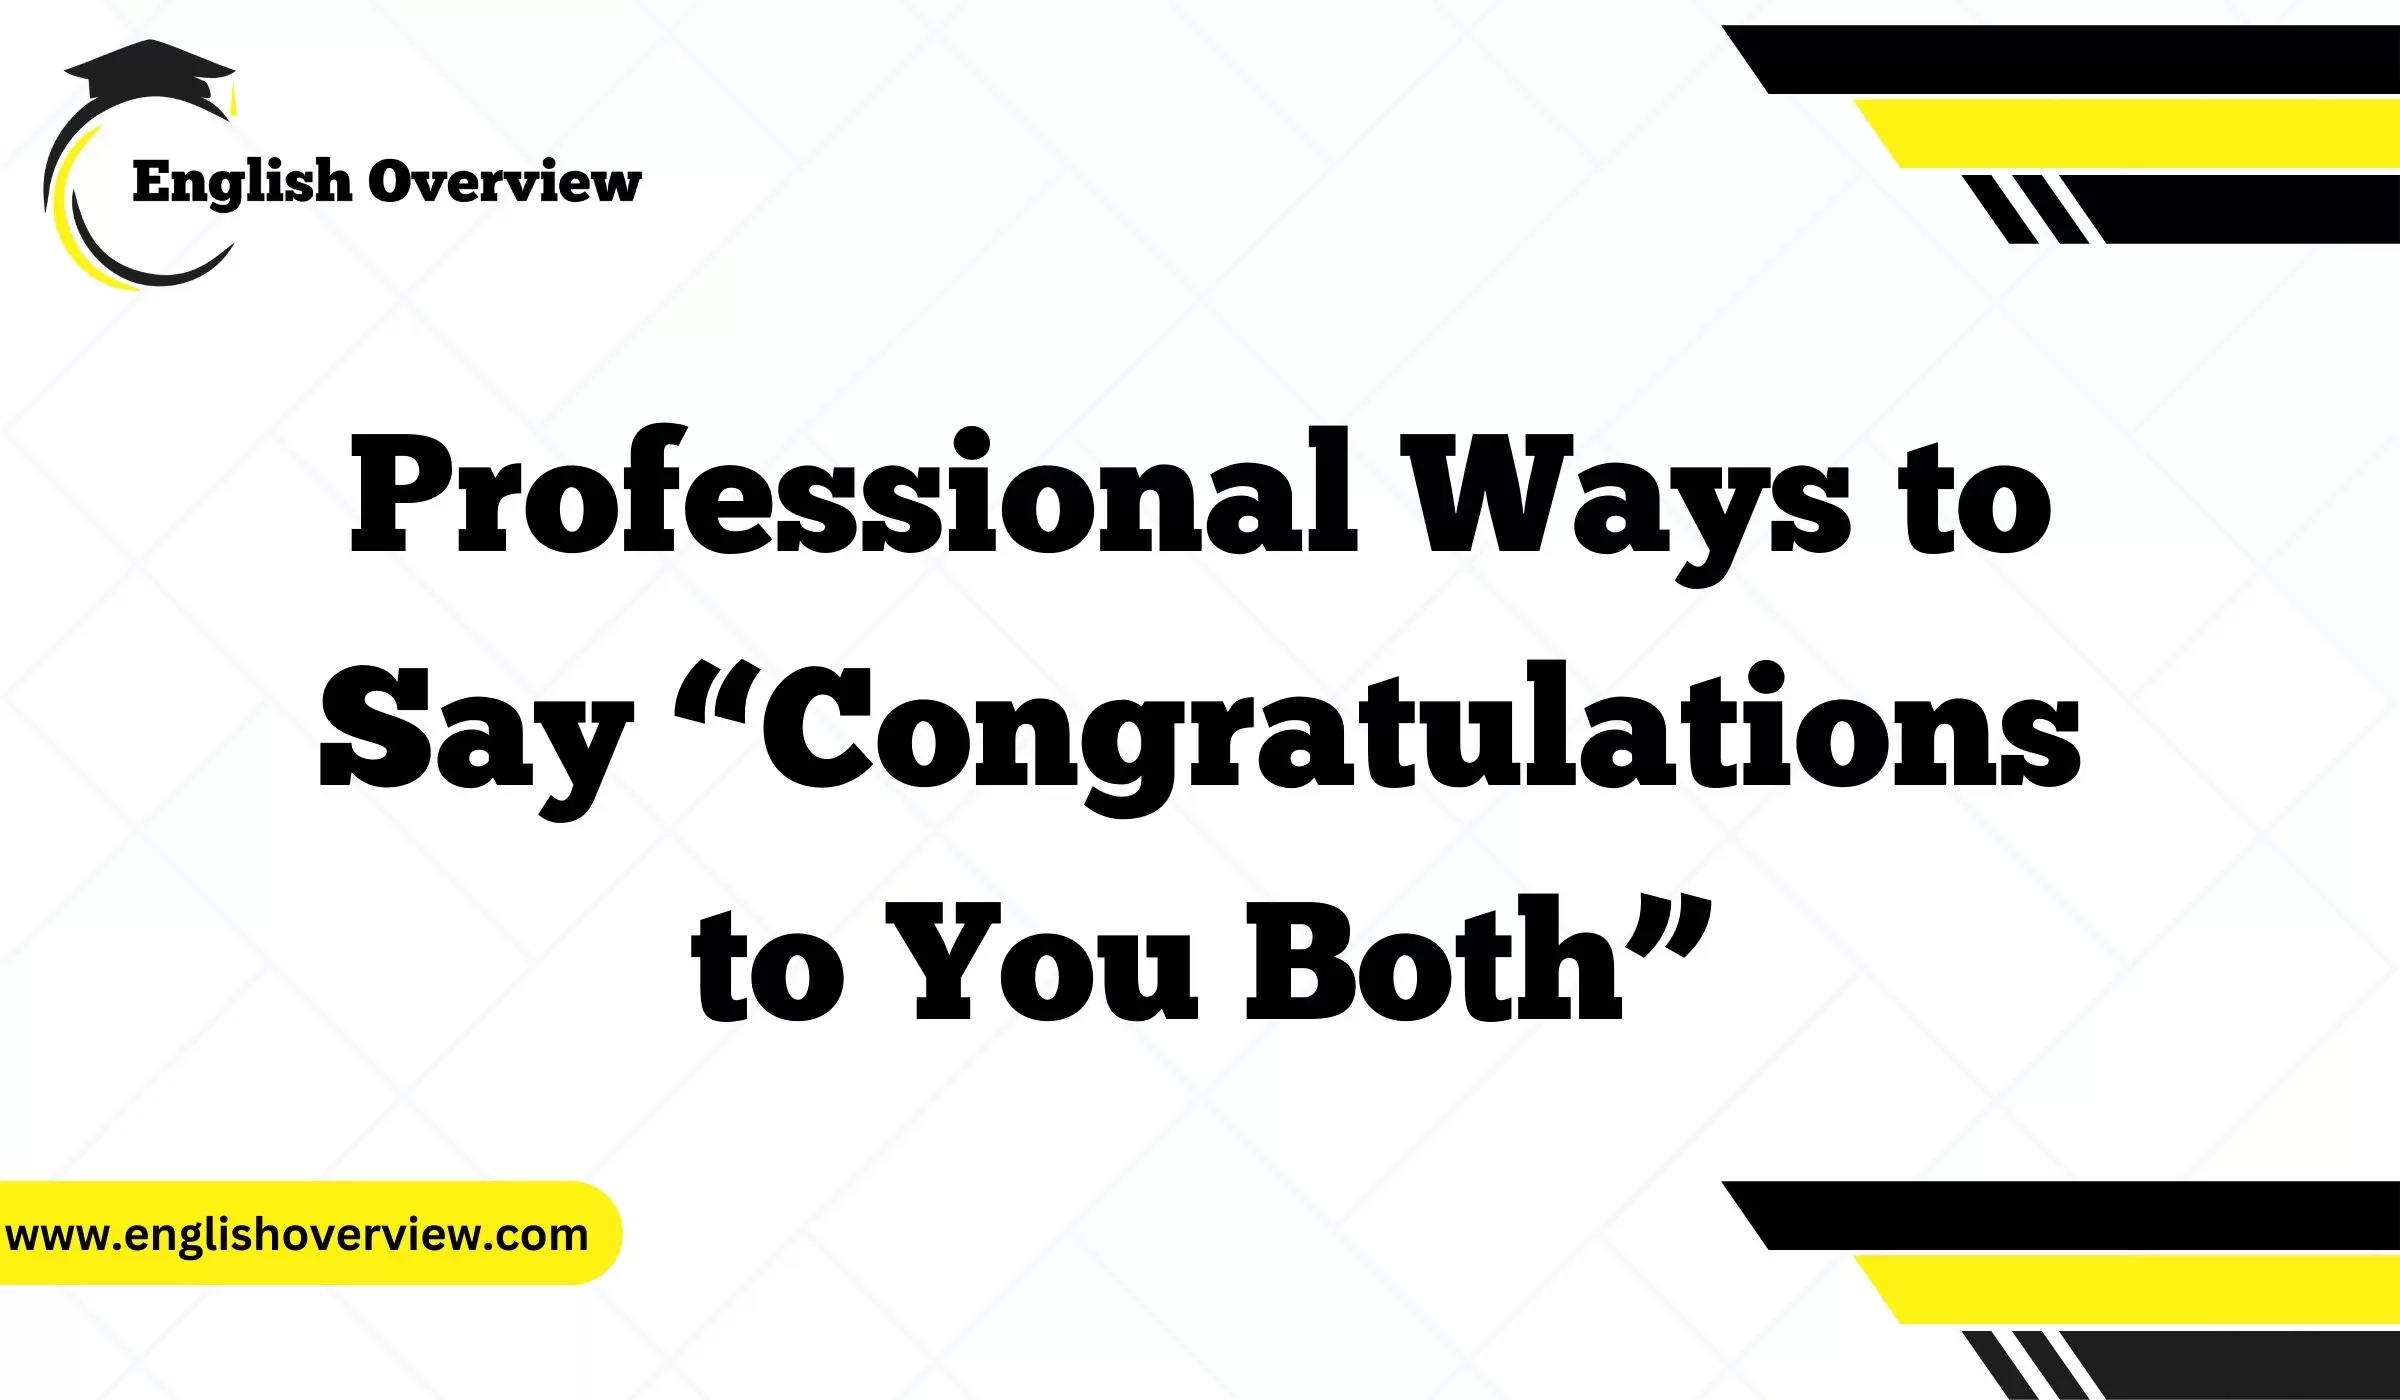 Professional Ways to Say “Congratulations to You Both”